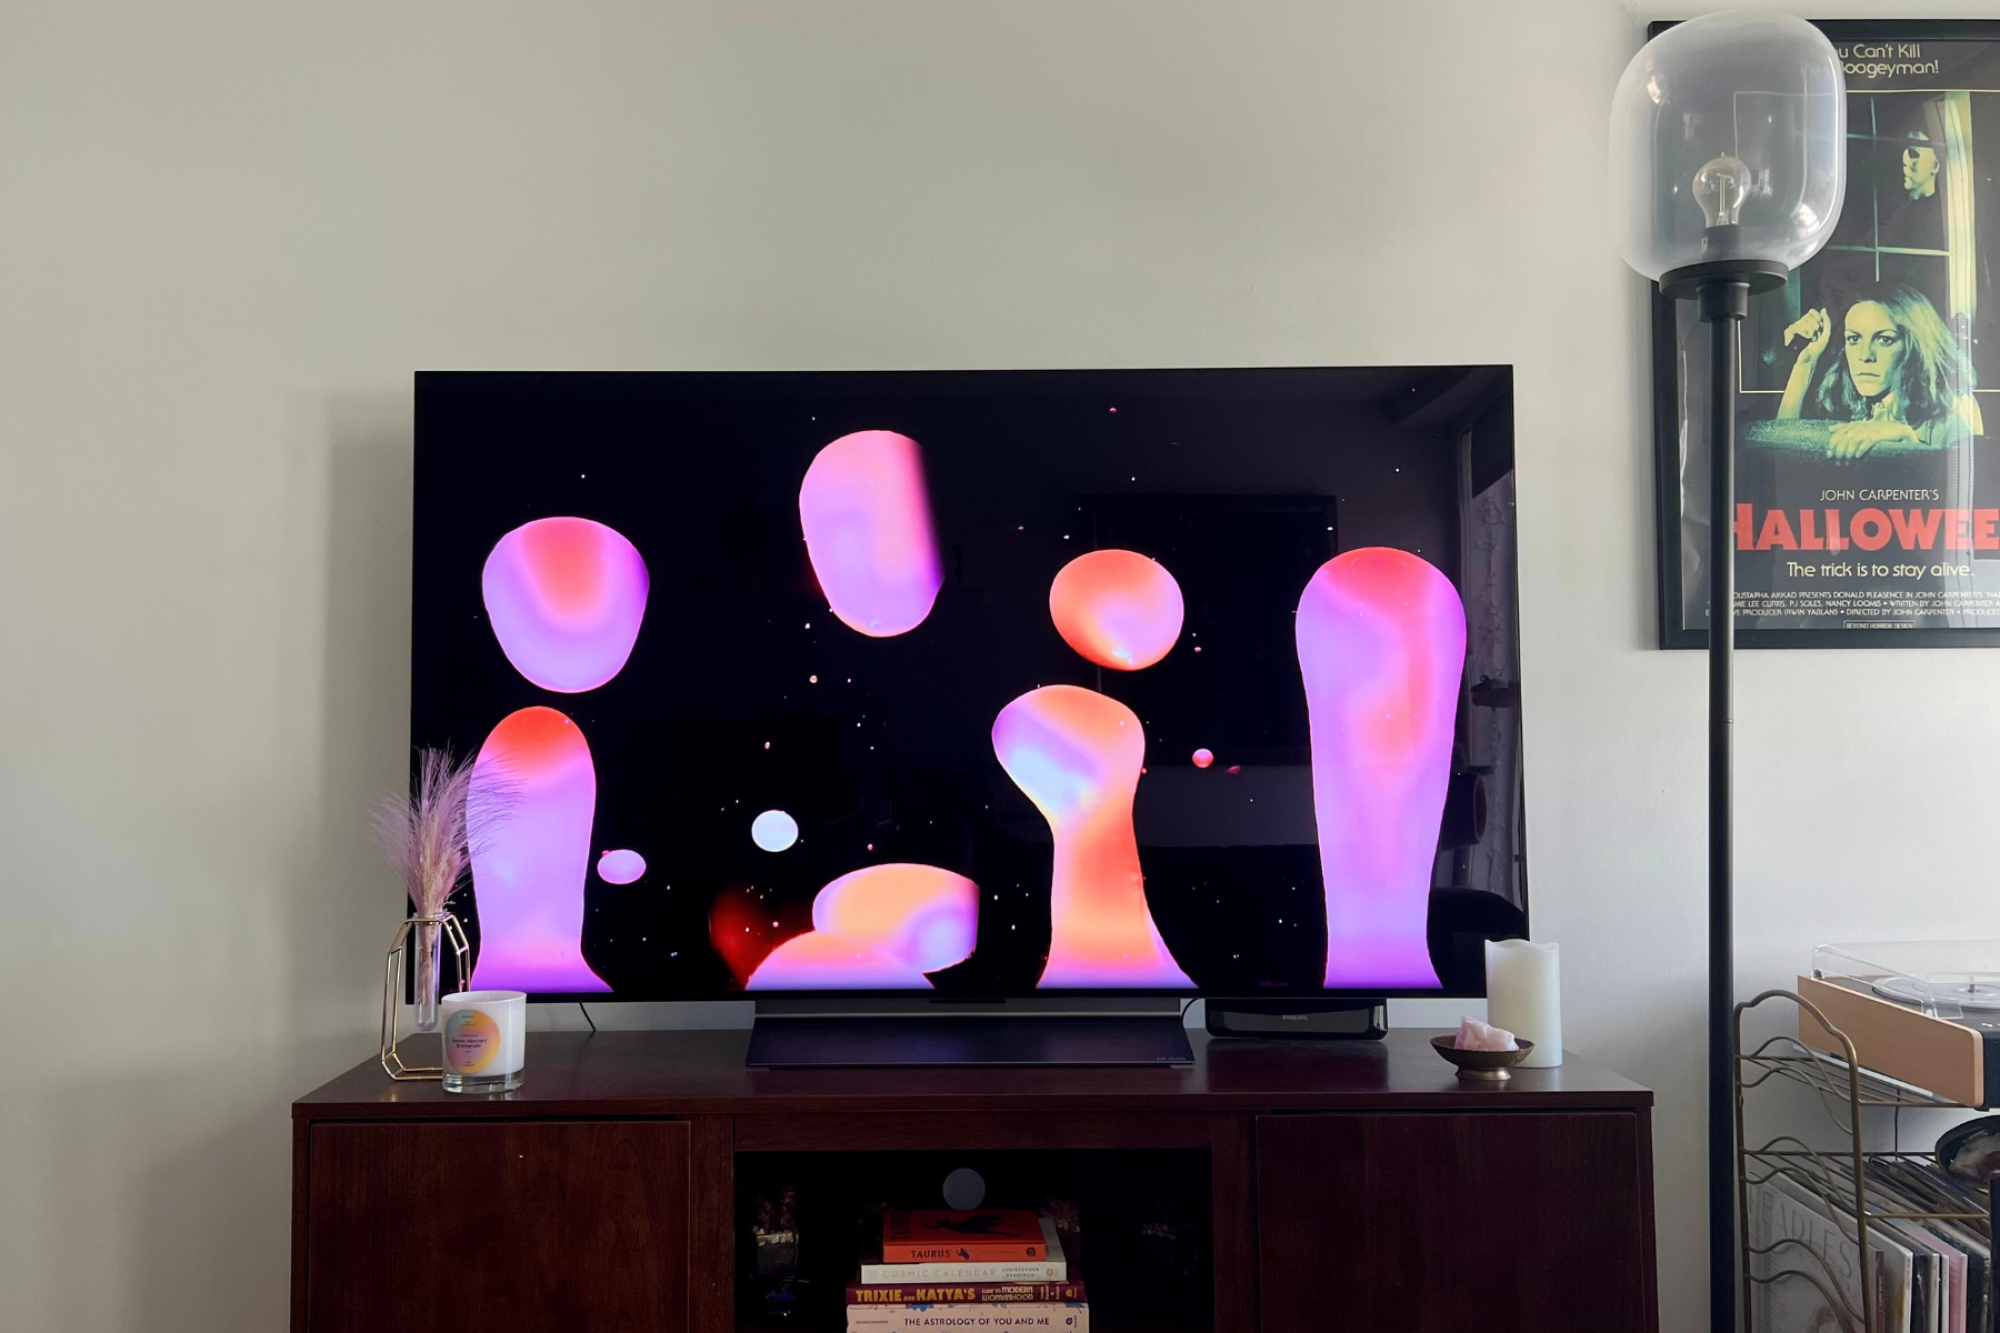 LG C3 TV with lava lamp screensaver sitting on TV stand with lamp in corner